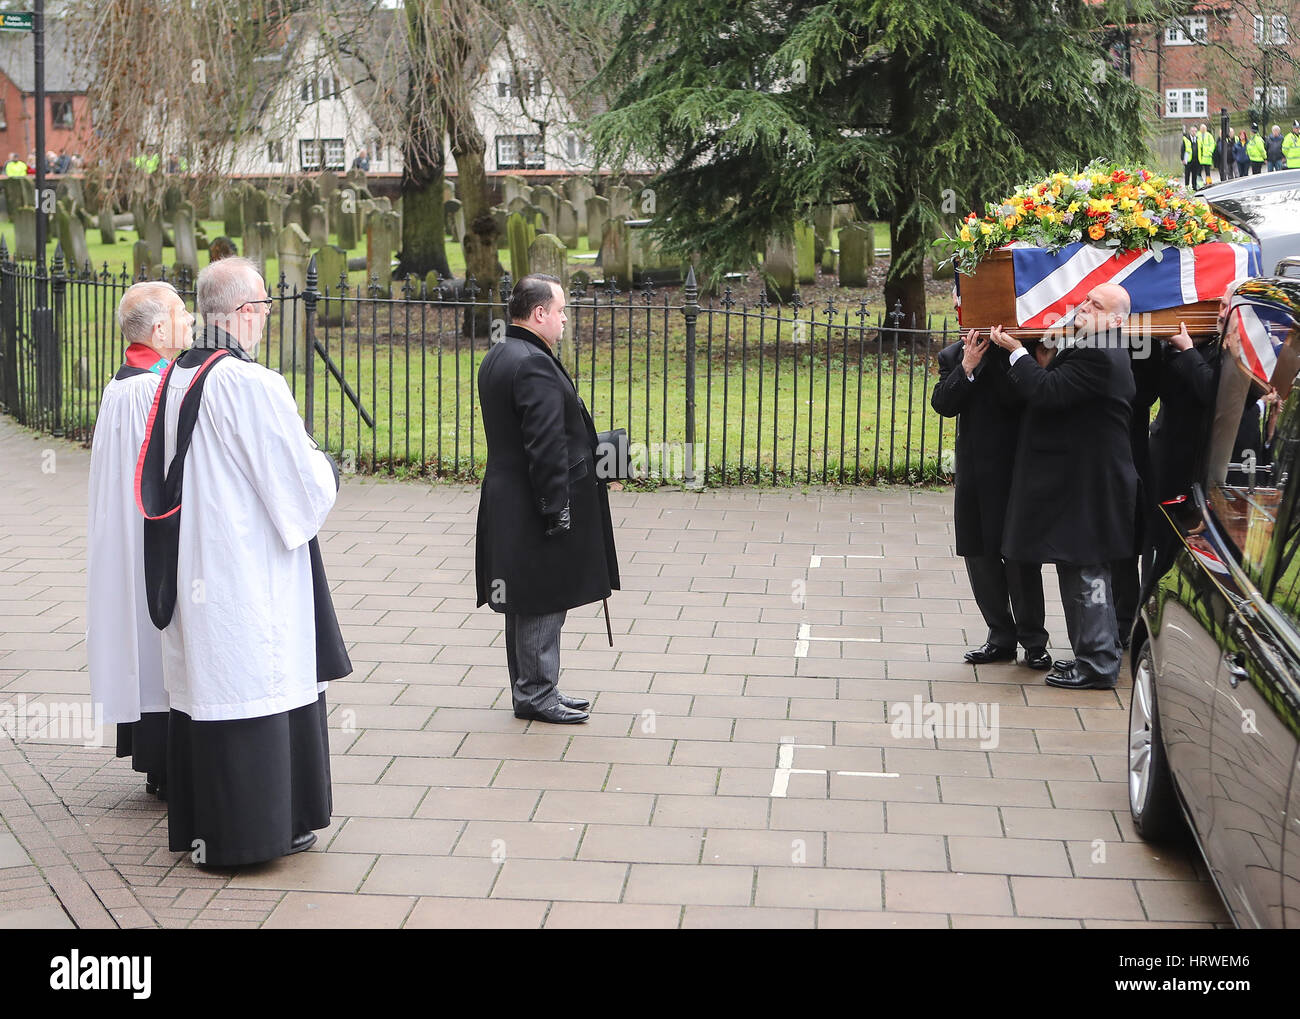 The funeral of ex-England manager Graham Taylor takes place at St. Mary's Church in Watford. Taylor managed Watford FC twice, famously during the time the club was owned by Elton John. He also managed Aston Villa and Wolves.  Featuring: Atmosphere Where: Stock Photo